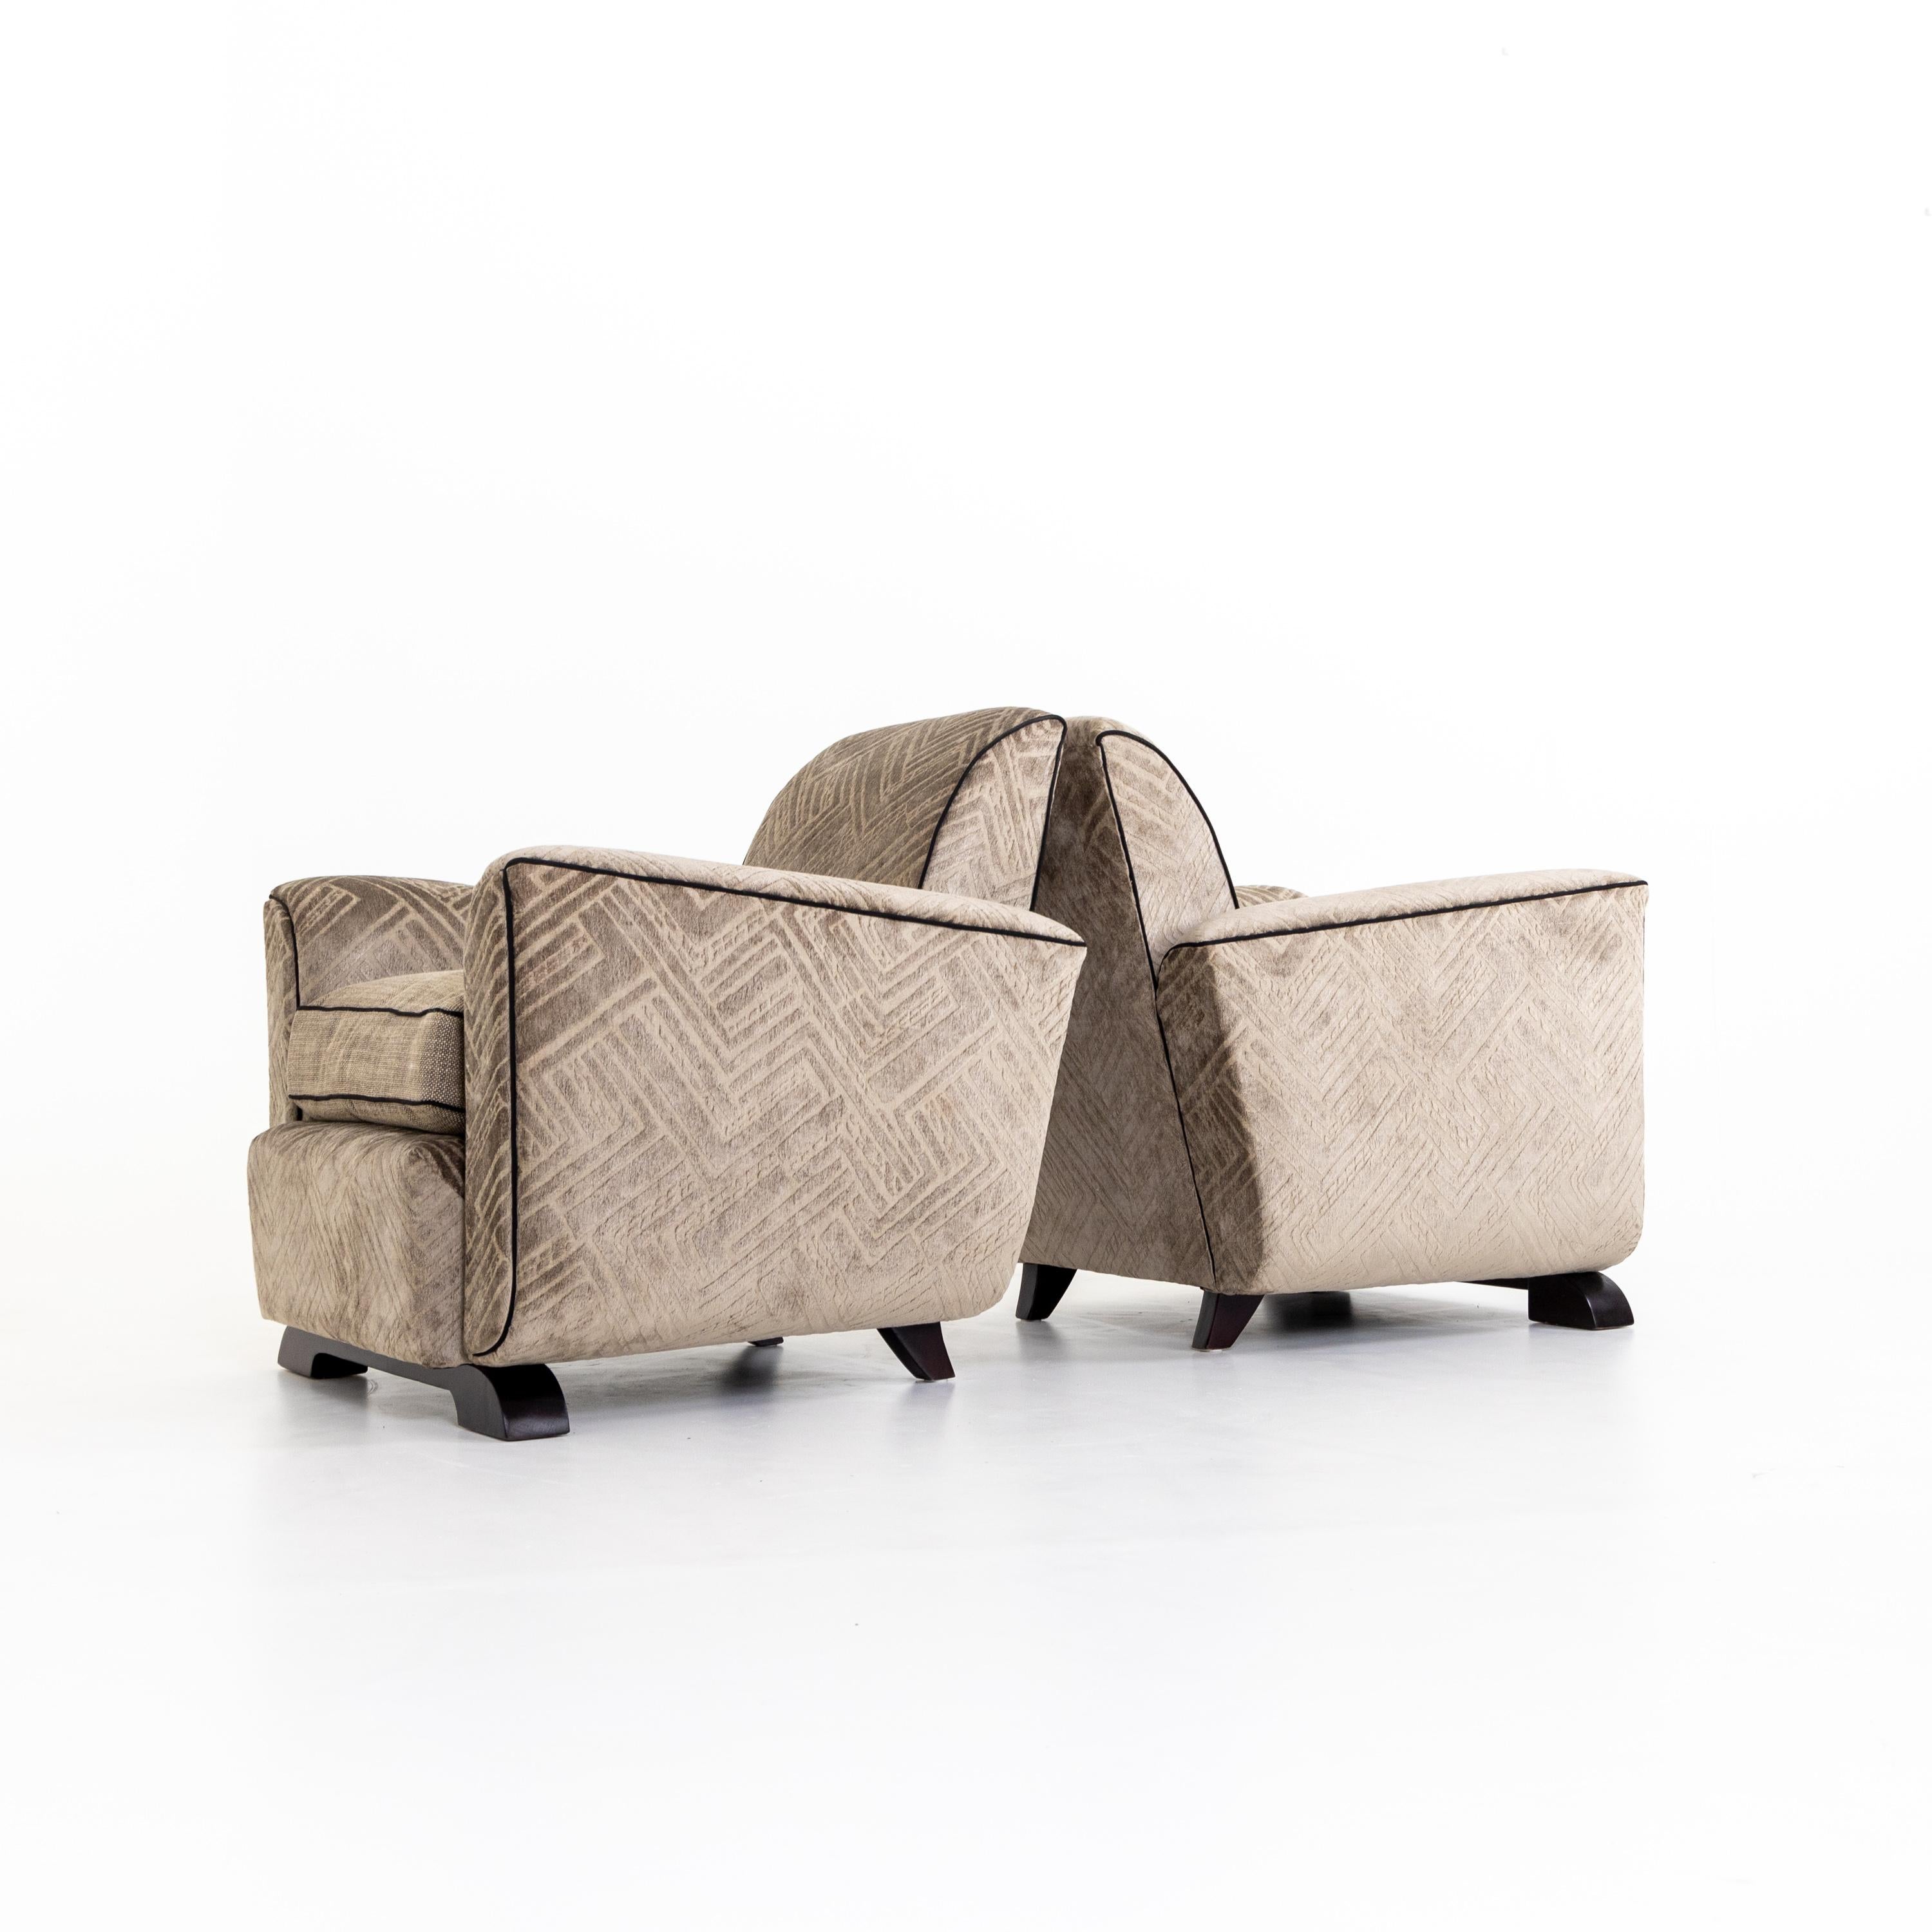 Pair of Art Deco armchairs with upholstered, slightly tulip-shaped seats standing on wooden legs. The armchairs have been reupholstered in a gray-brown fabric with a geometric pattern.